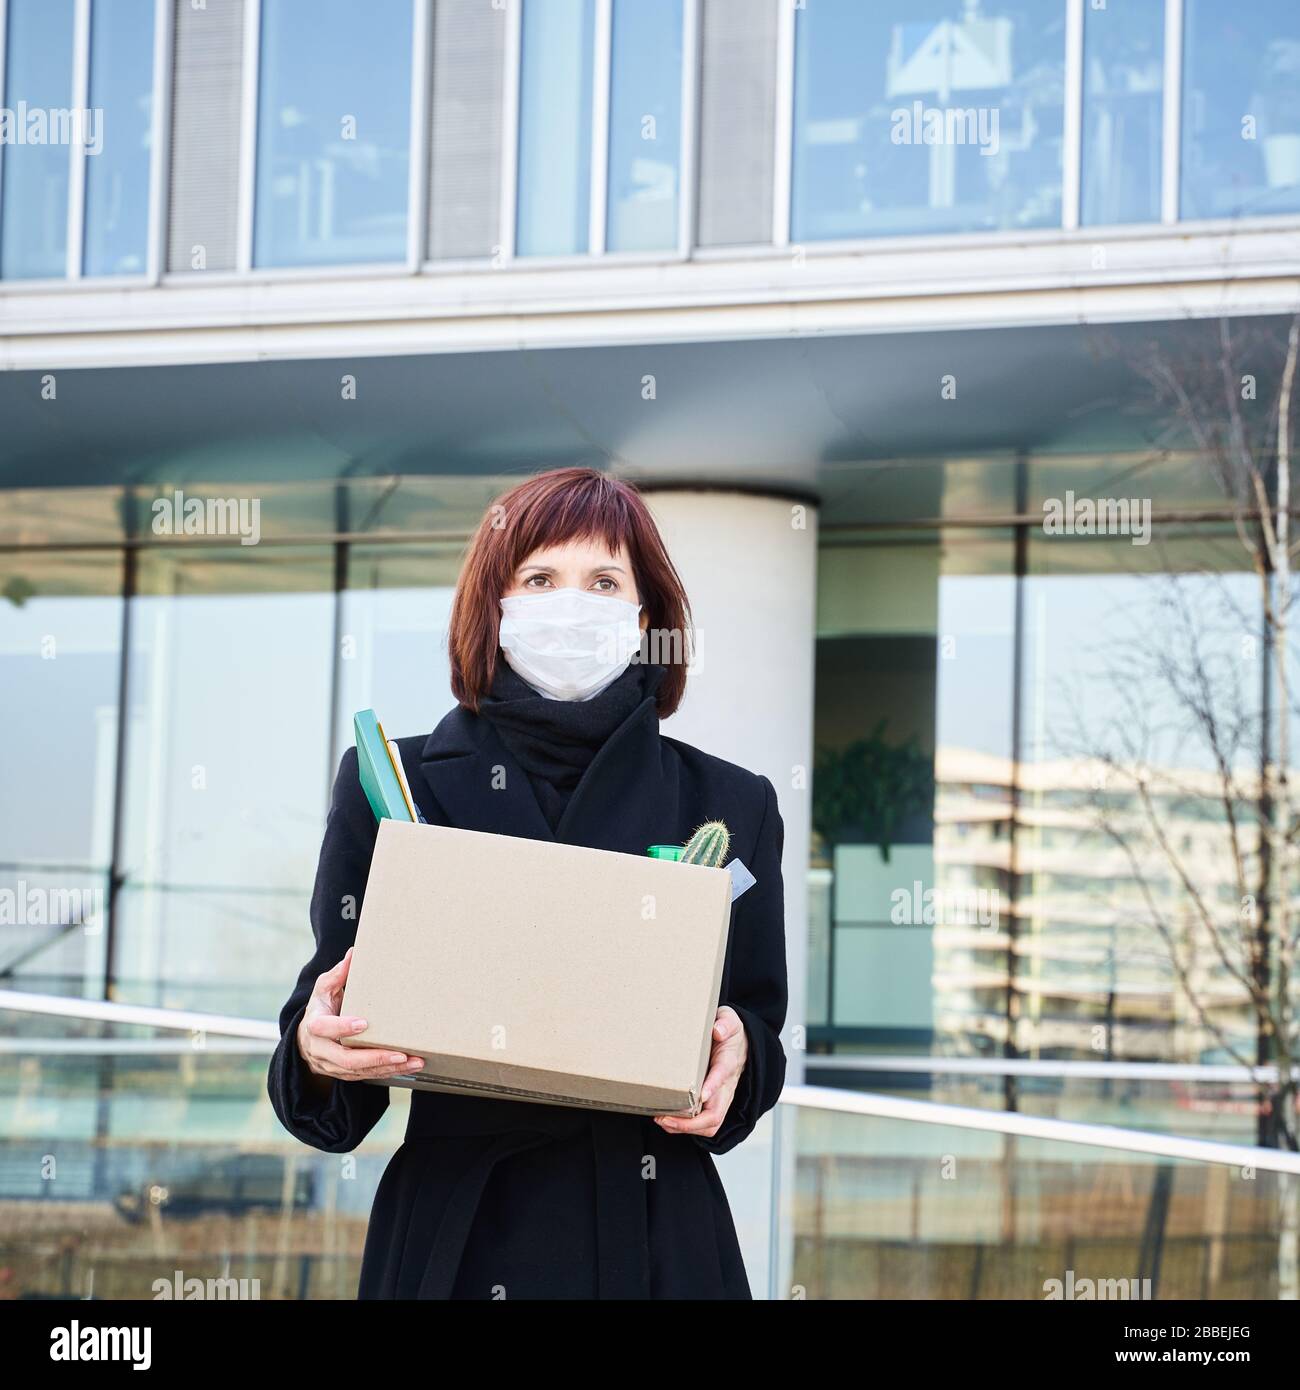 Concept of job loss due to the COVID-19 virus pandemic. Woman in mask lost job because of coronavirus. Female with box of his things against backgroun Stock Photo